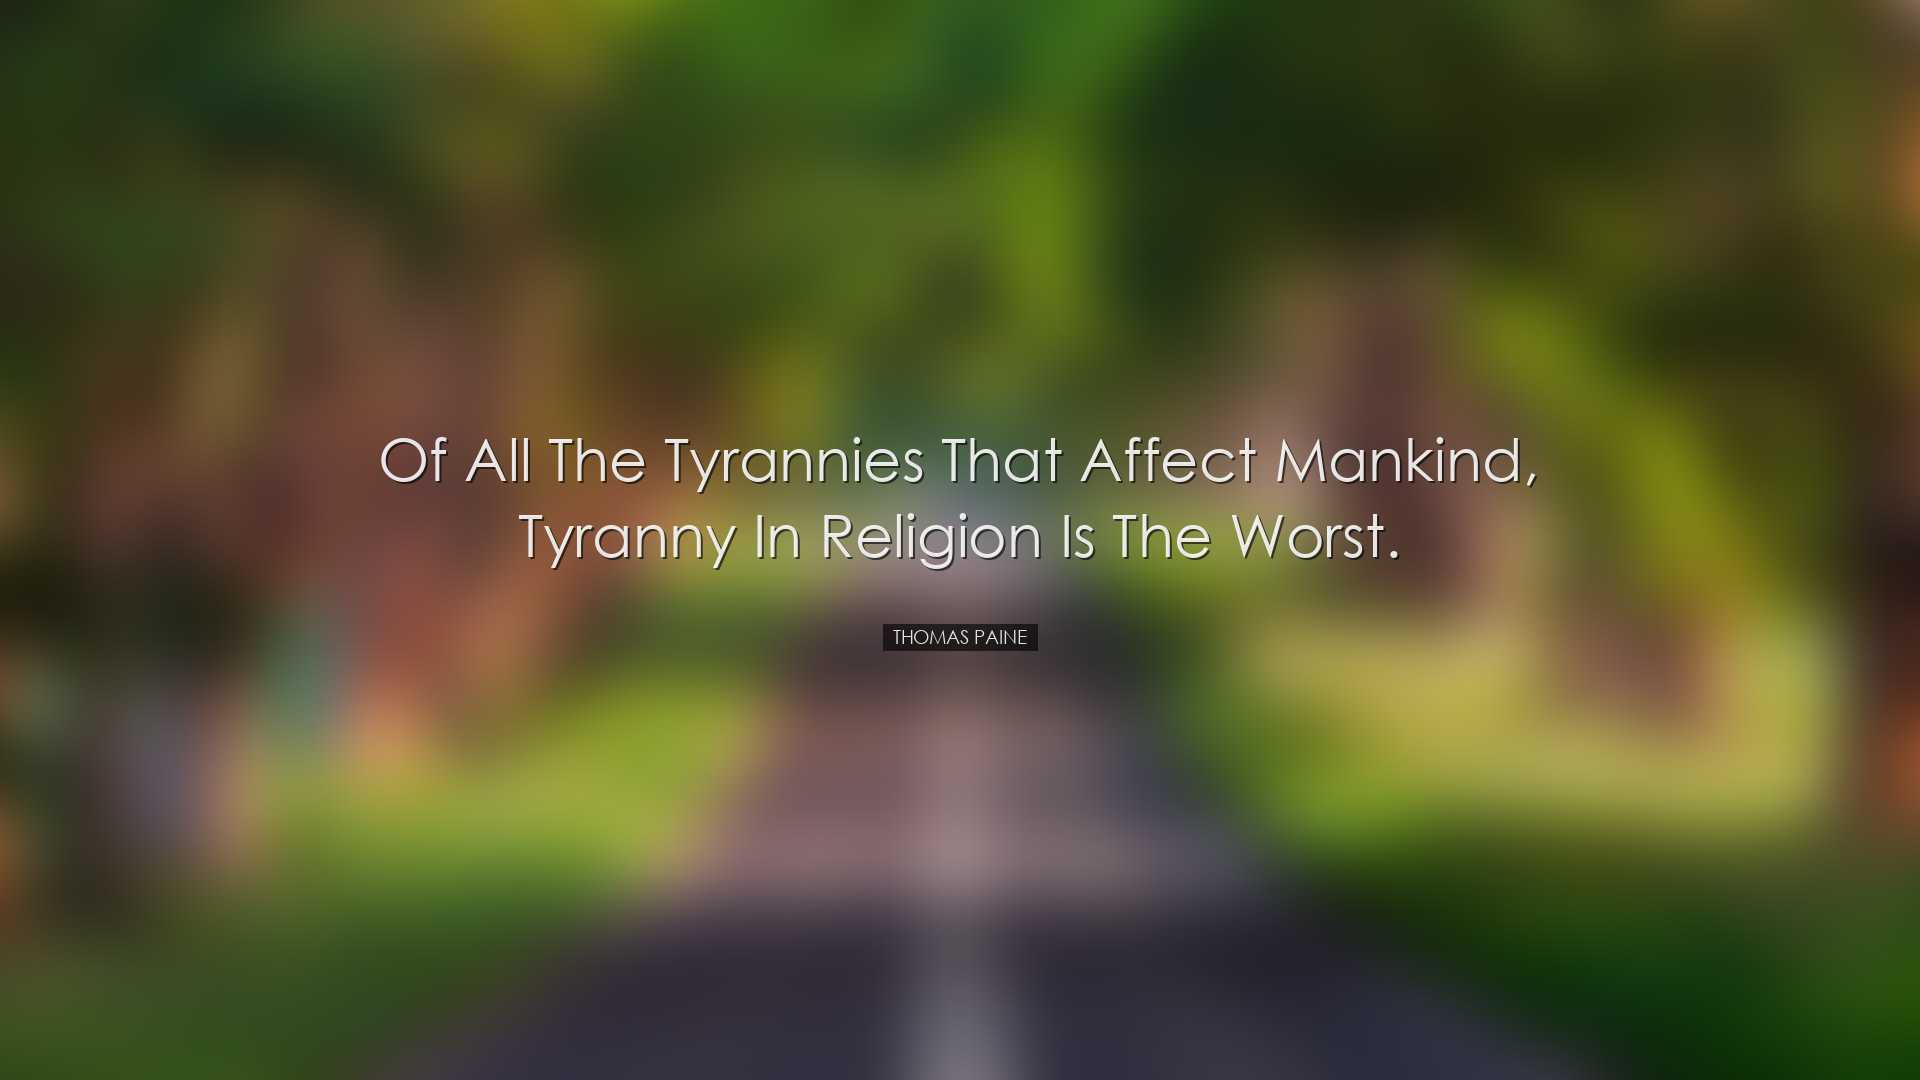 Of all the tyrannies that affect mankind, tyranny in religion is t